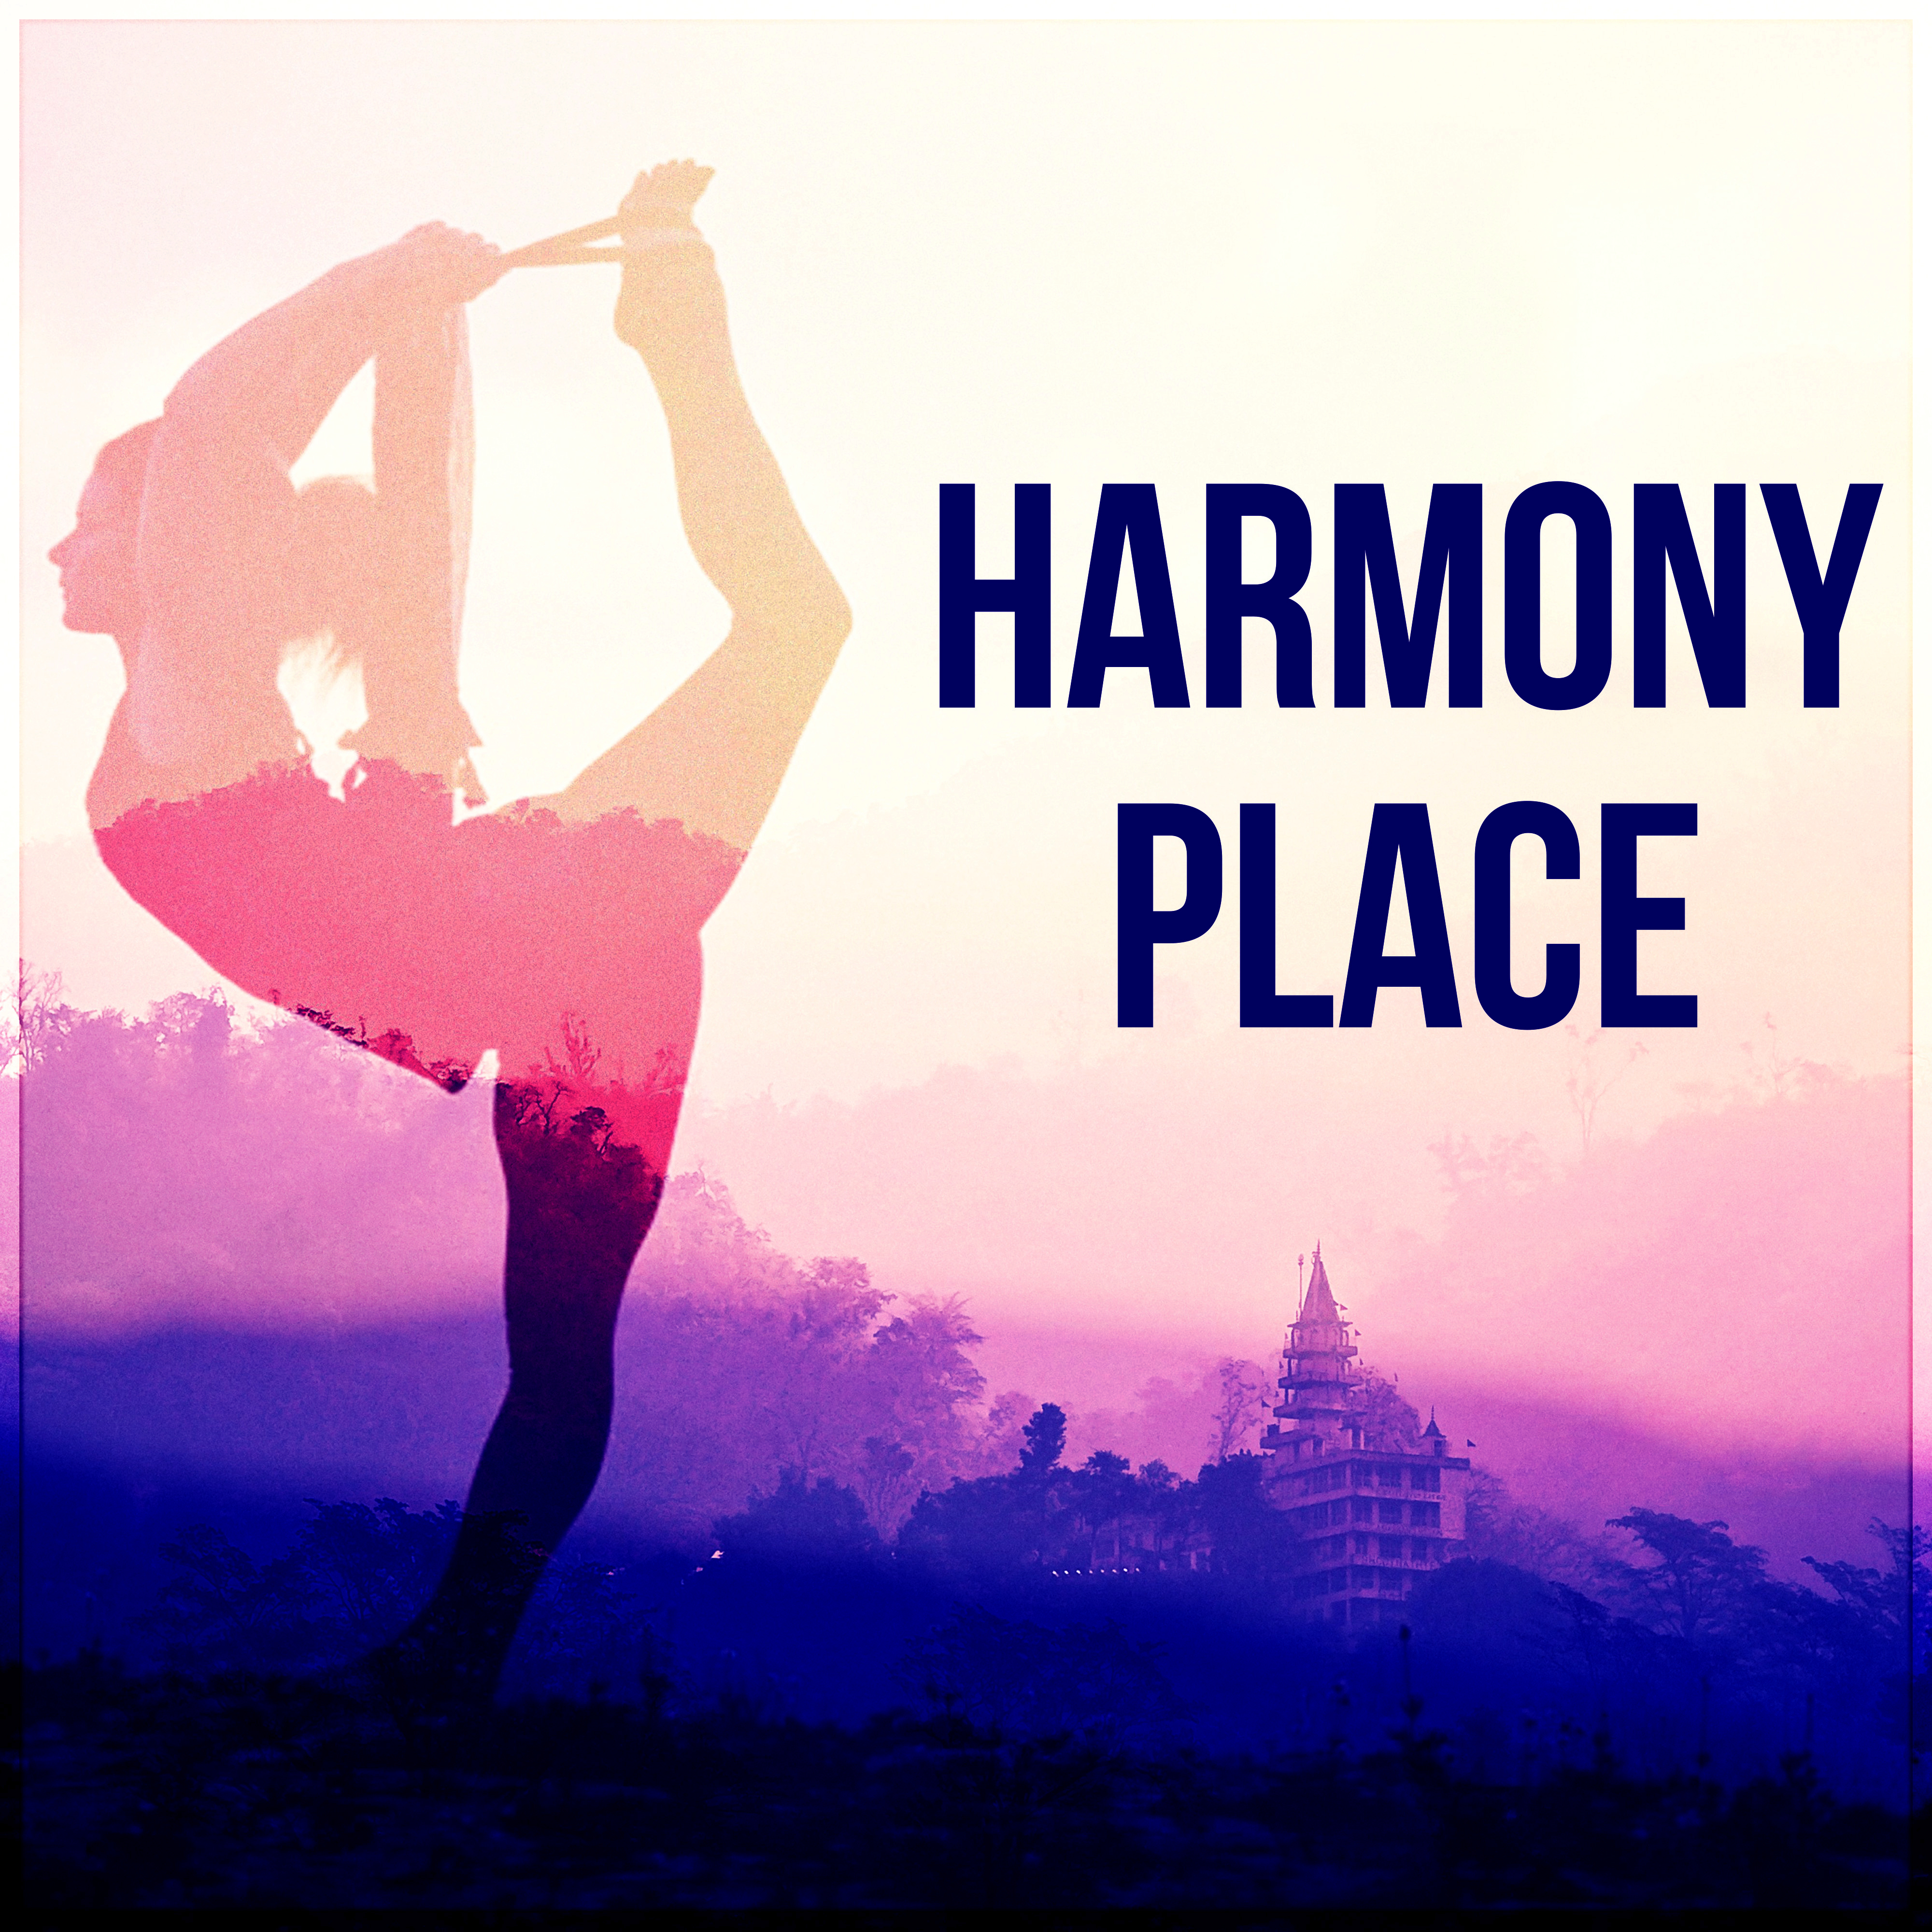 Harmony Place - Background Music for Inner Peace, Well Being, Deep Meditation, Calming Music, Insomnia Help Sleeping Music